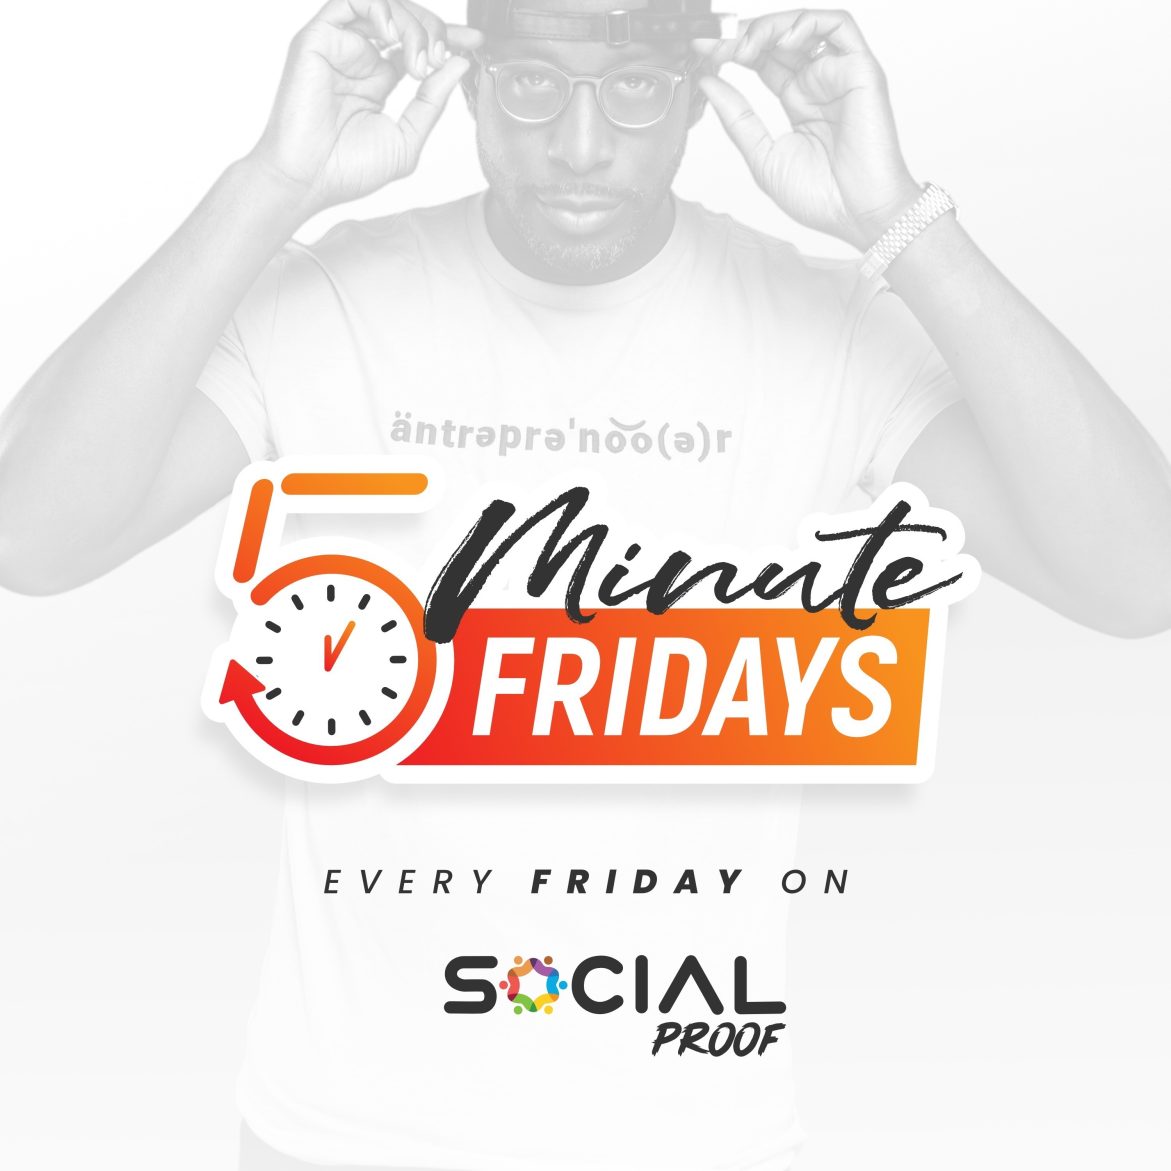 Black Podcasting - What It Takes To Be An Influencer - 5 MINUTE FRIDAYS